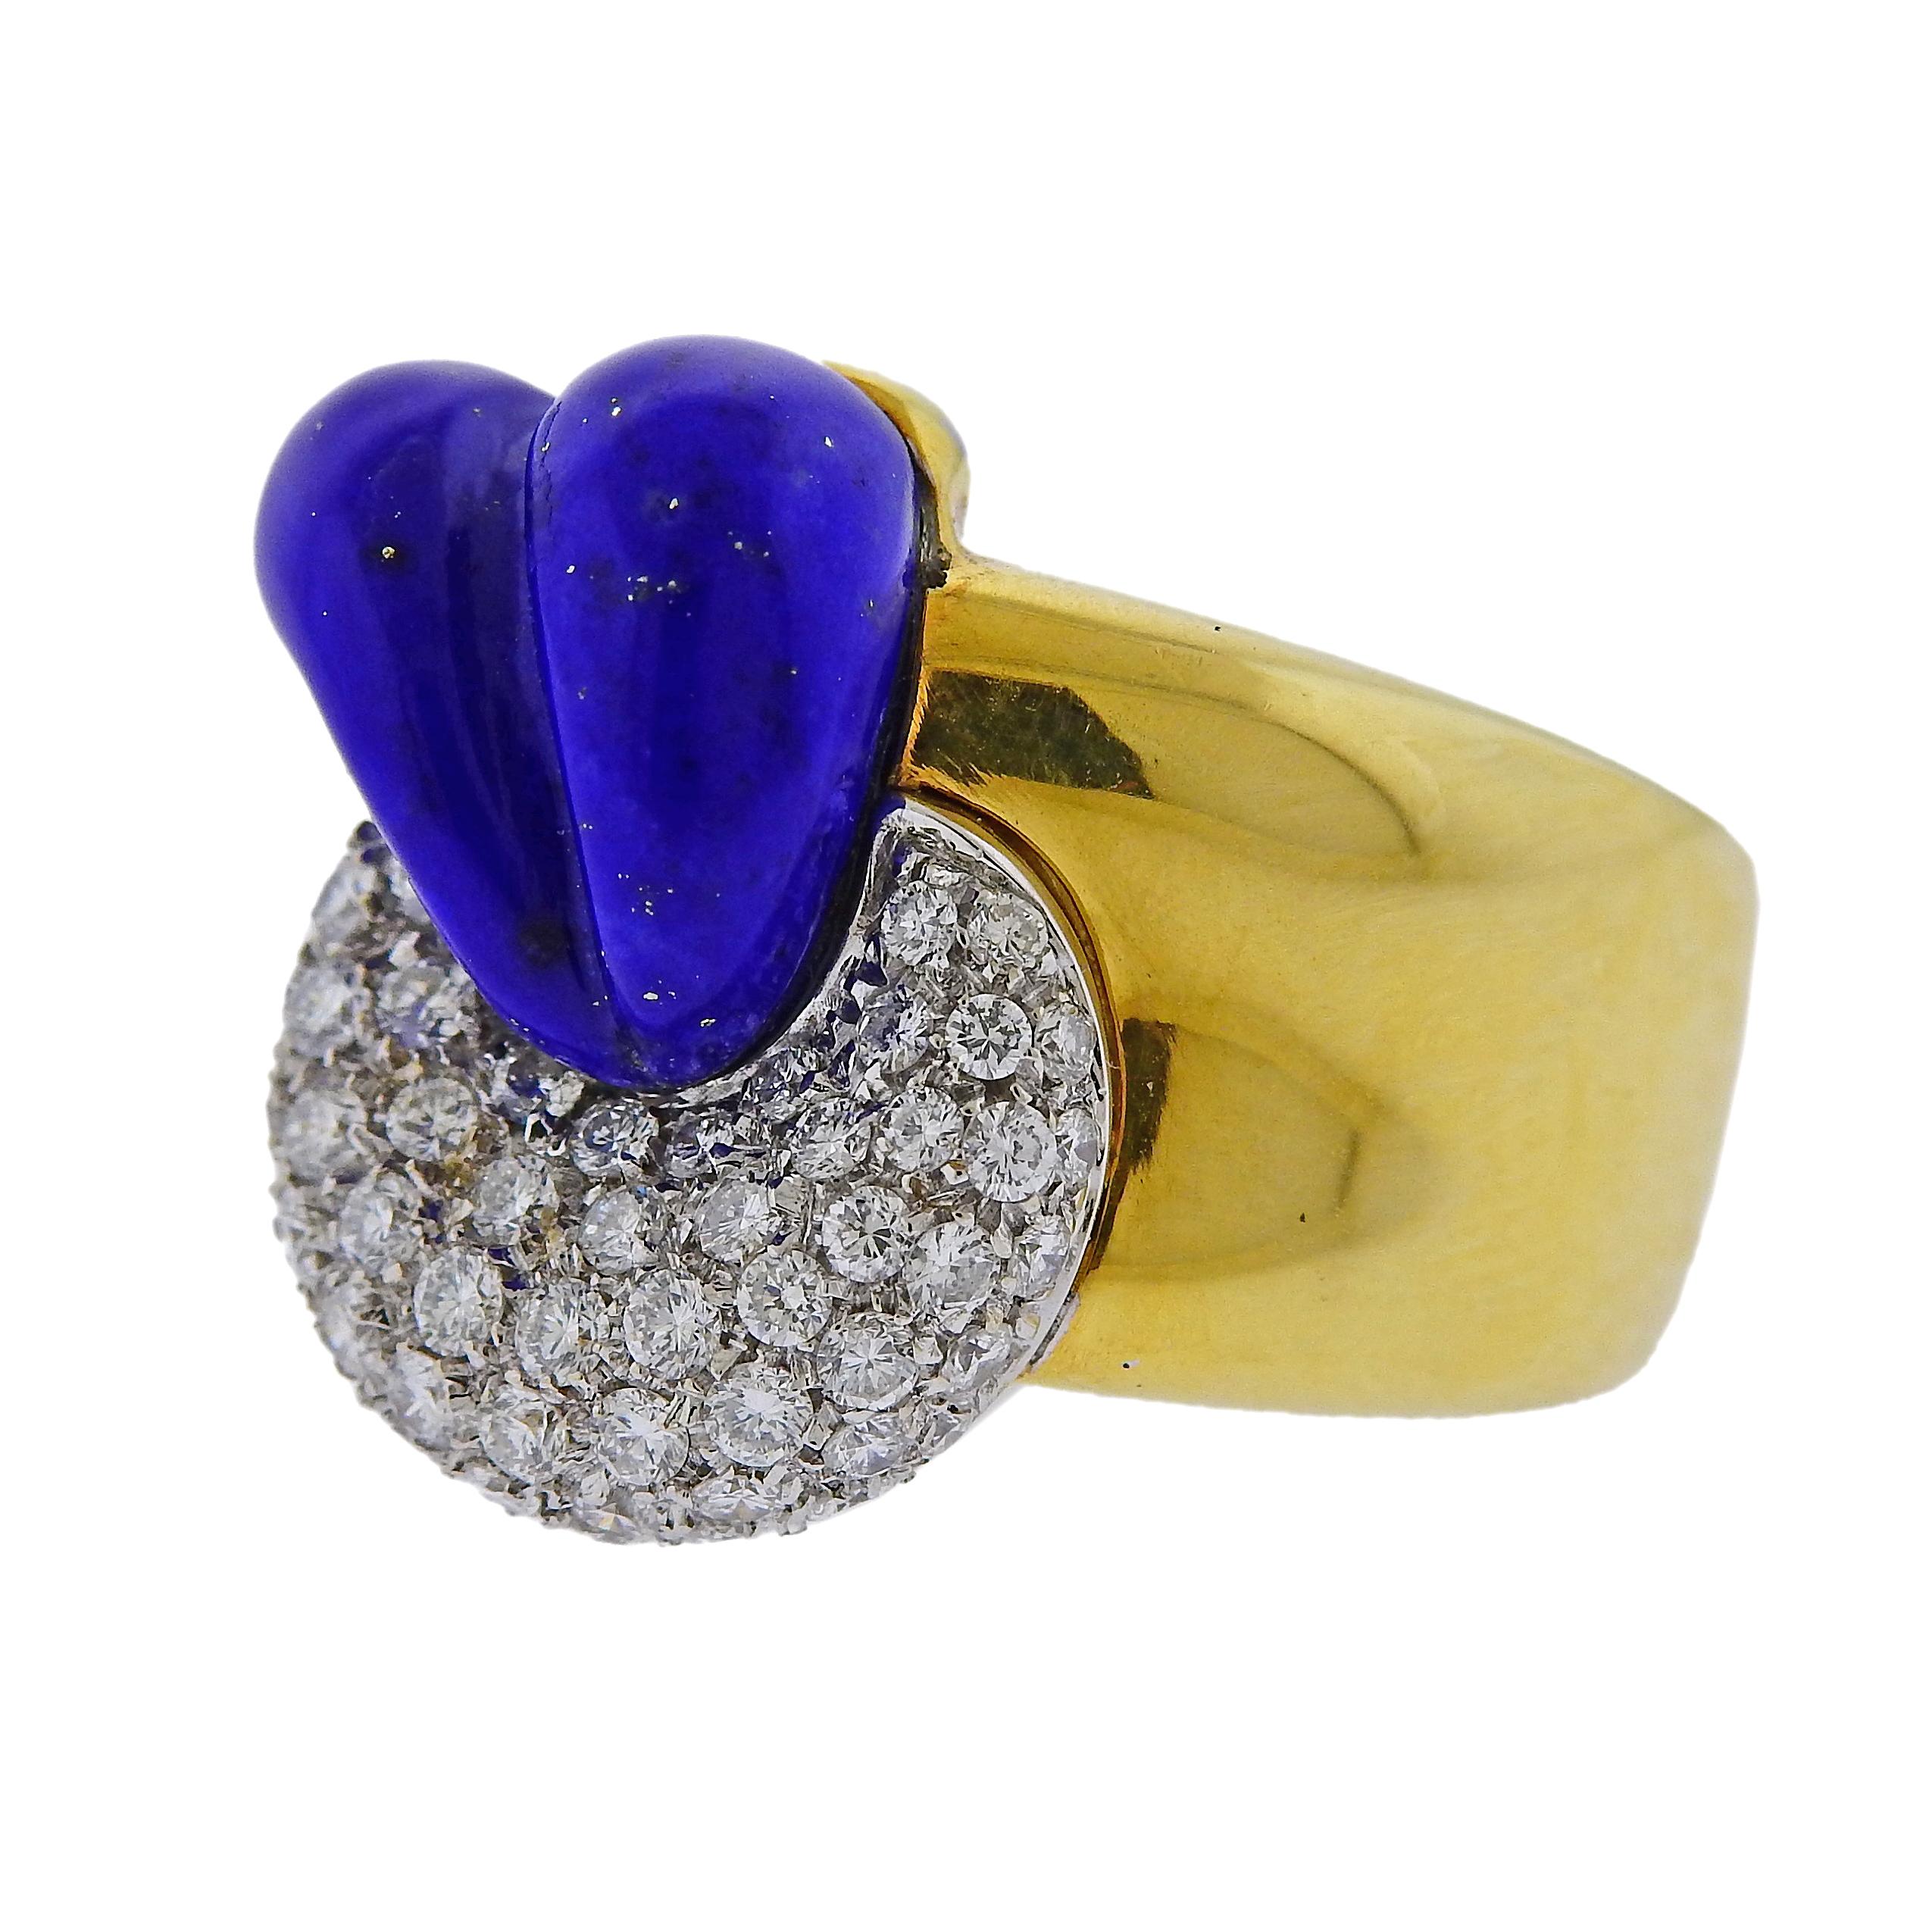 18k yellow gold ring by Leo Pizzo, adorned with carved lapis lazuli and approx. 0.85ctw in G/VS diamonds. Ring size - 7.5, ring top is 21mm wide and weighs 15.5 grams. Marked Italy, Leo Pizzo, 750, Italian mark. 